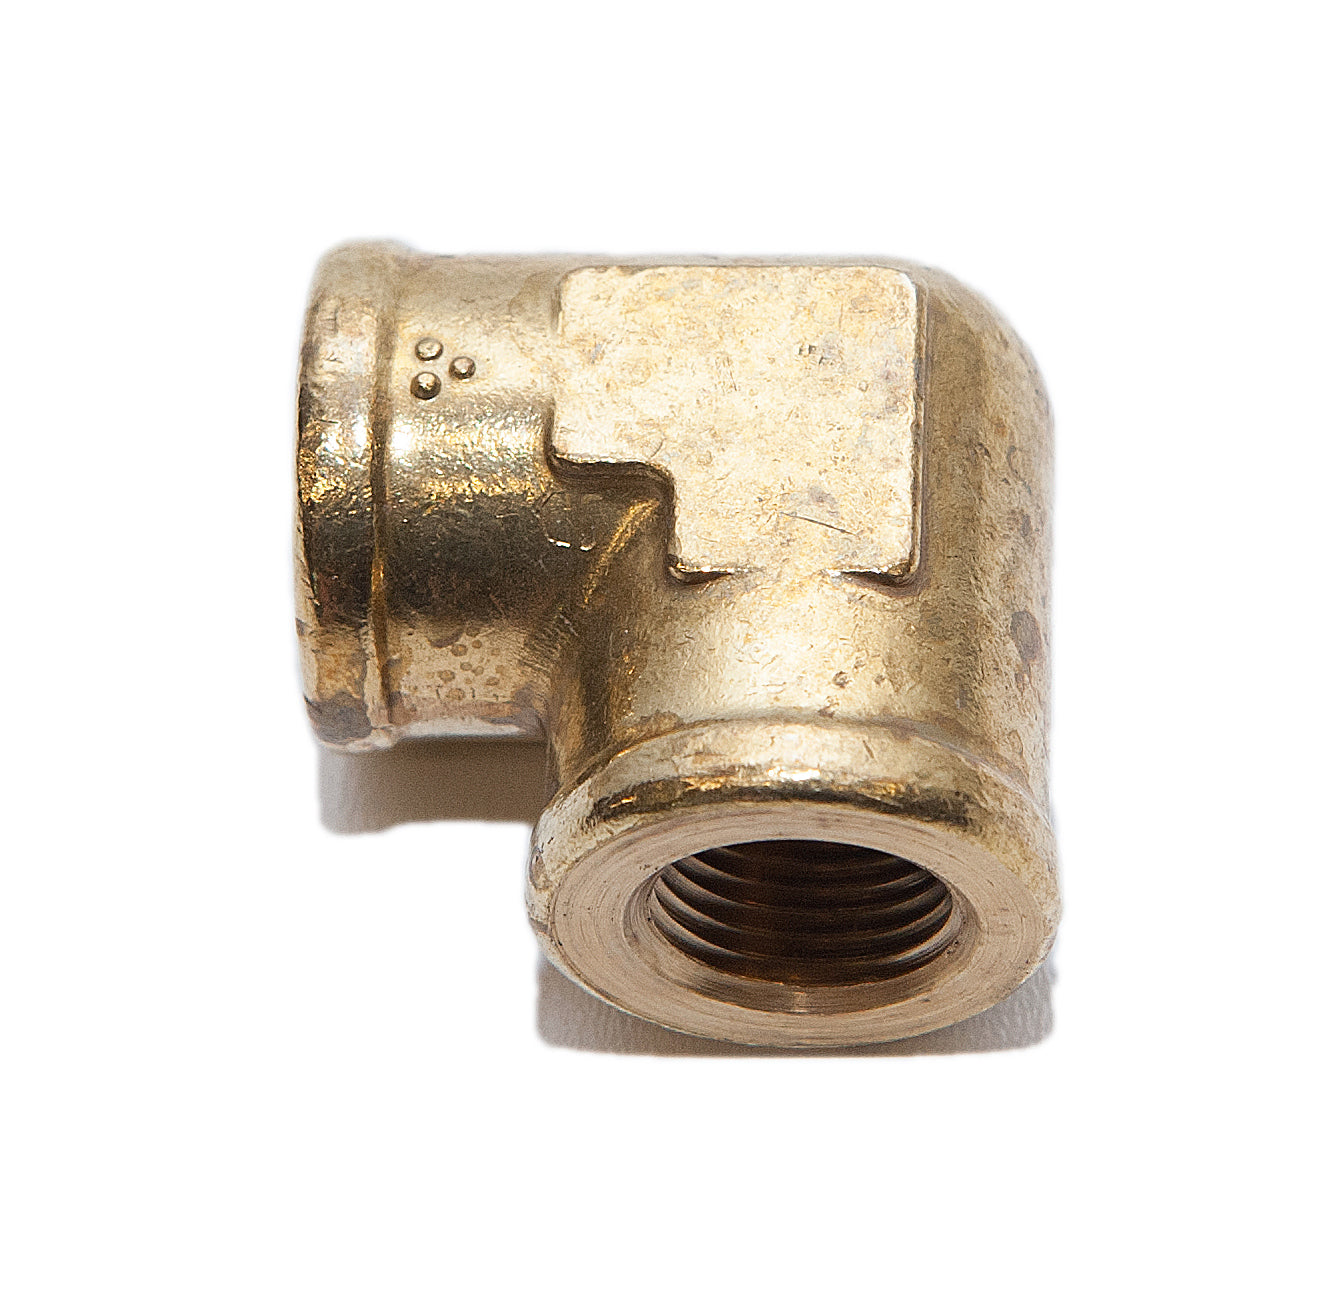 Brass Fitting - 100DC 1/2" Female to 3/8" Female Pipe Thread Elbow | Barbecues Galore Get it online or in store in Burlington, Oakville, Etobicoke, and Calgary